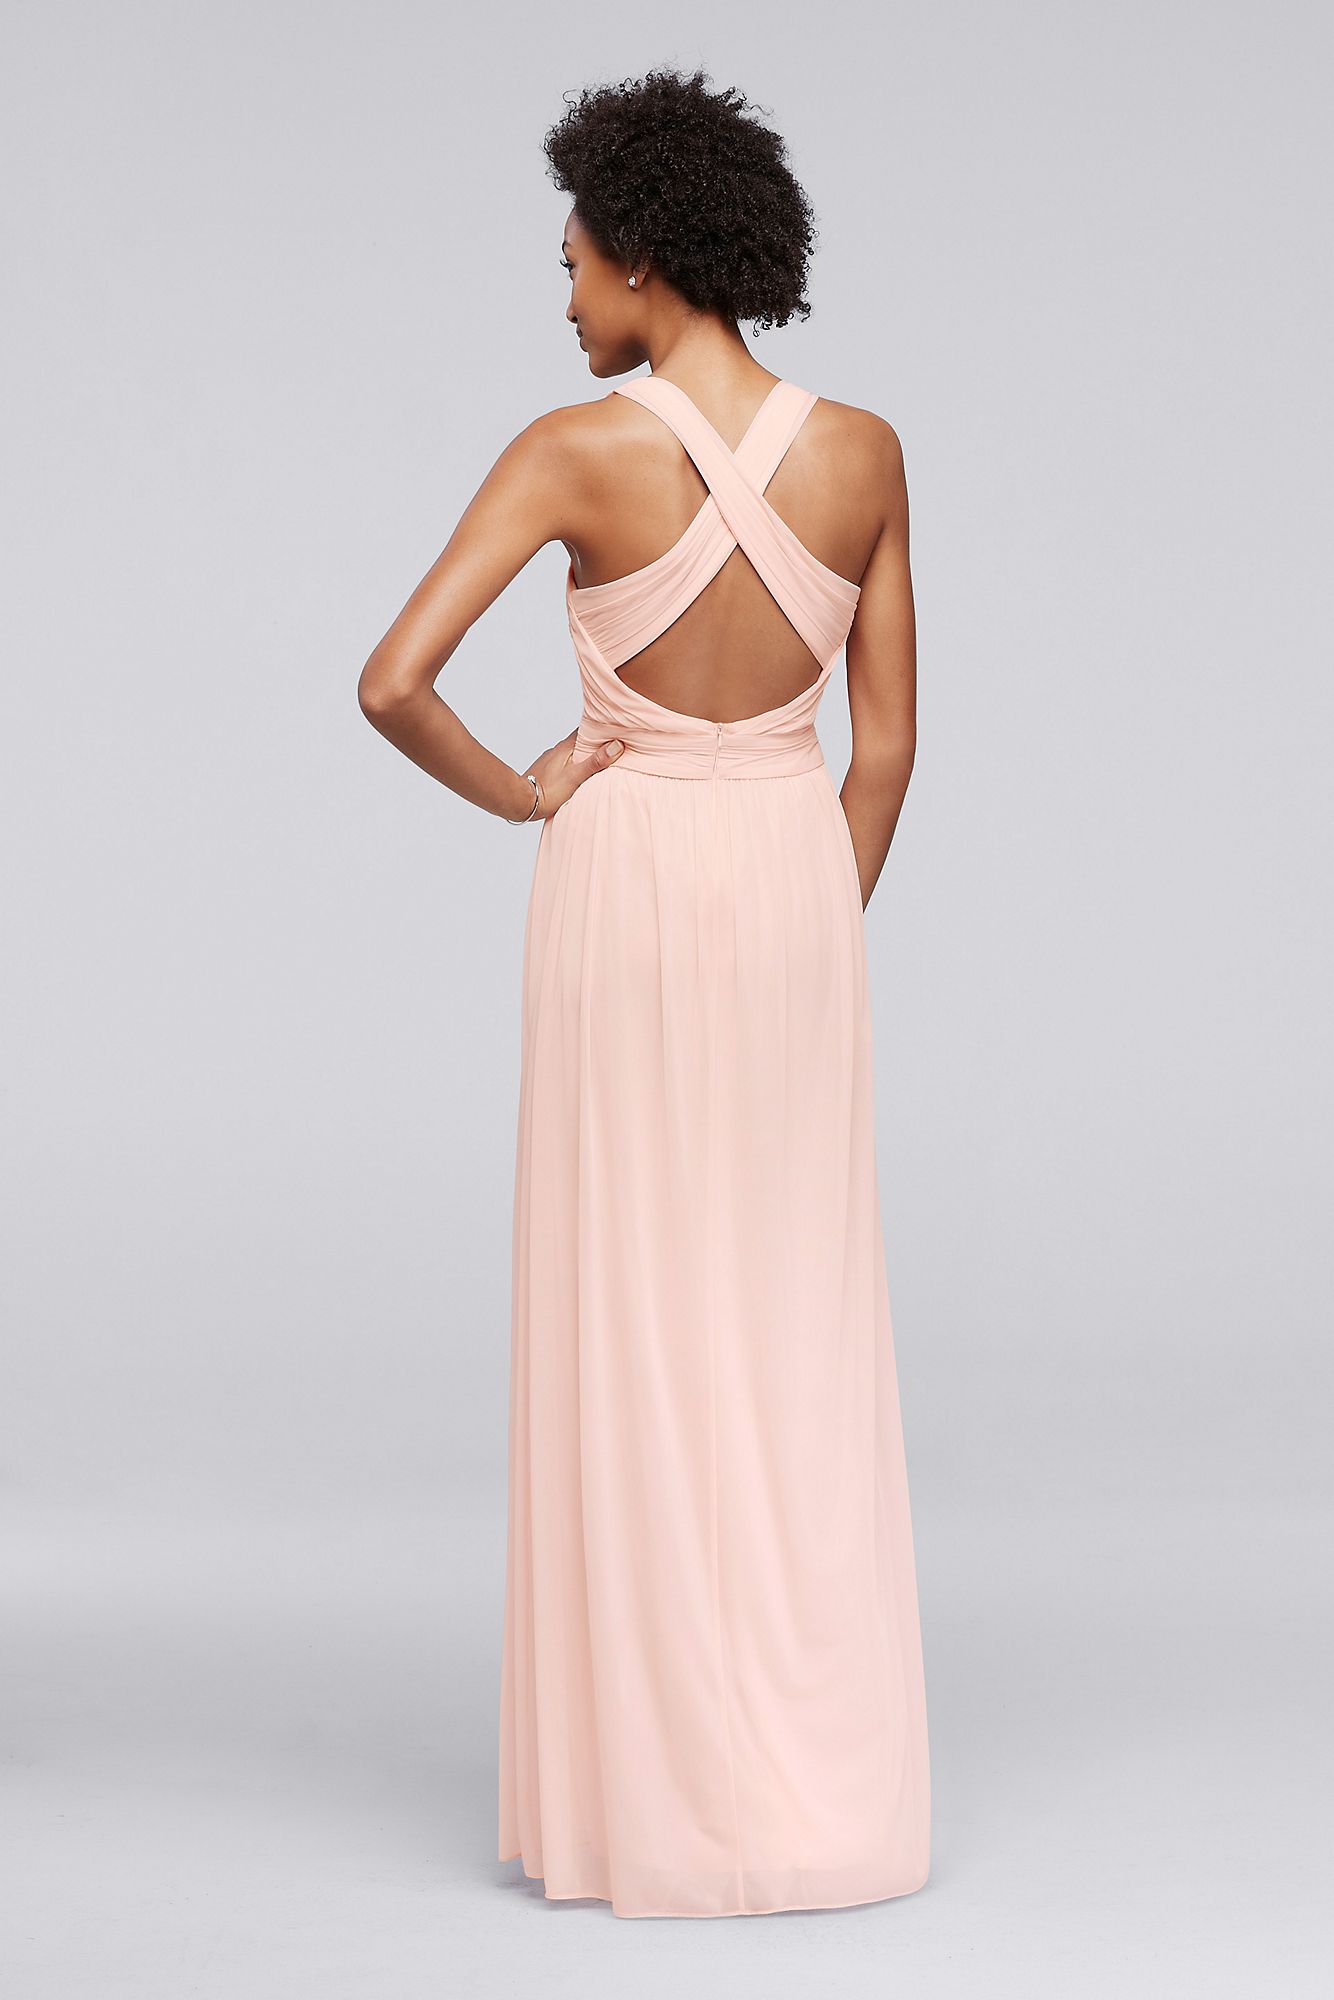 Long Bridesmaid Dress with Crisscross Back Straps   W10974